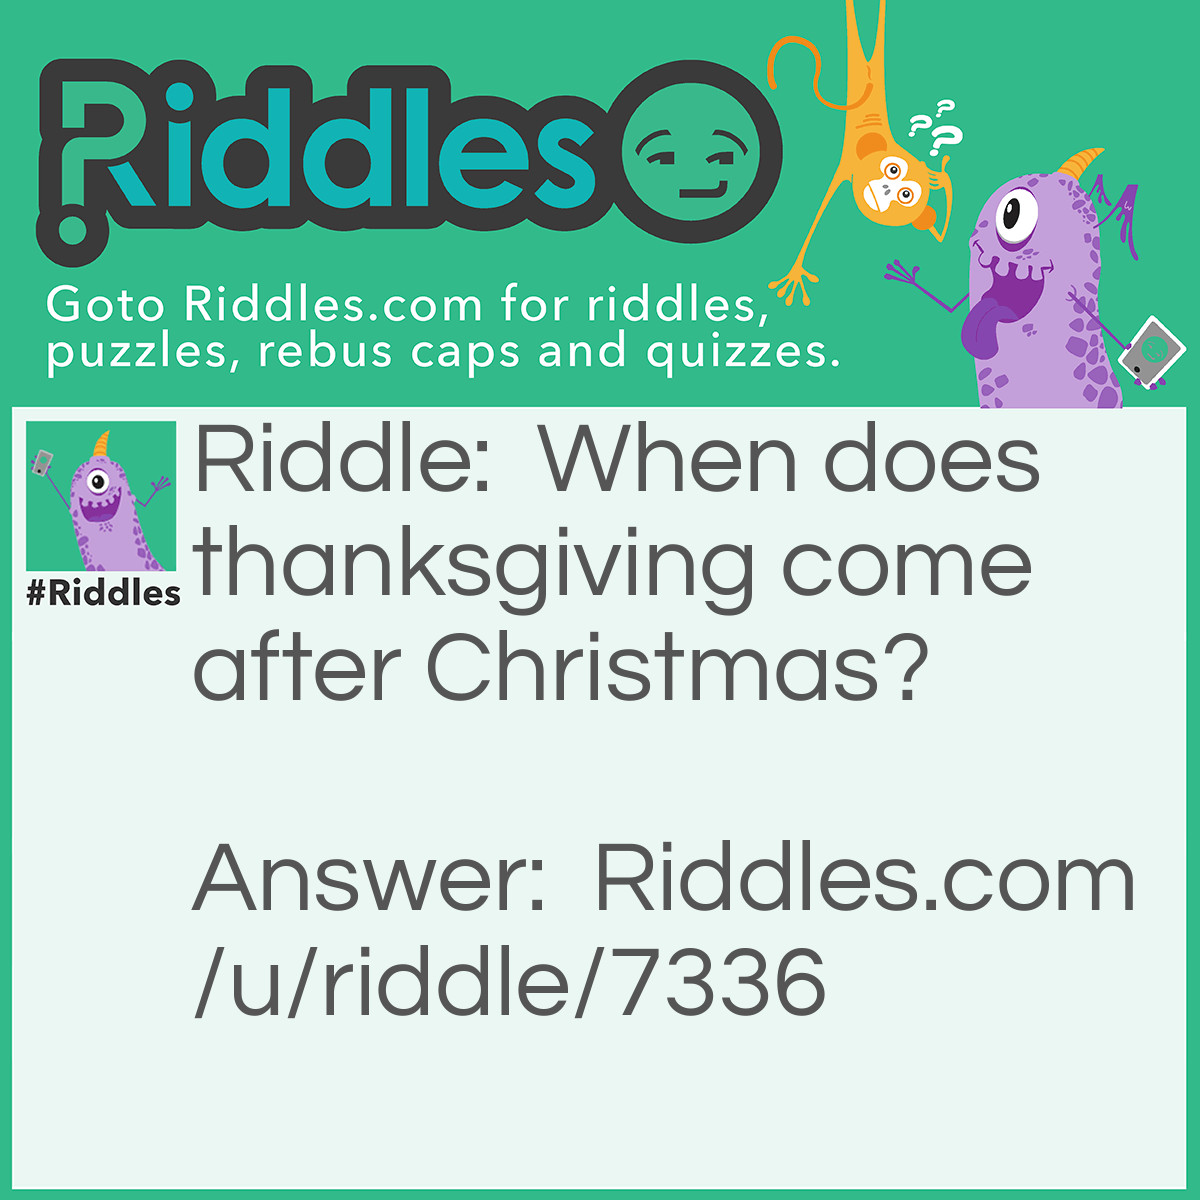 Riddle: When does <a href="https://www.riddles.com/quiz/thanksgiving-riddles"><strong>Thanksgiving</strong></a> come after <strong><a href="https://www.riddles.com/quiz/christmas-riddles">Christmas</a></strong>? Answer: Next year!